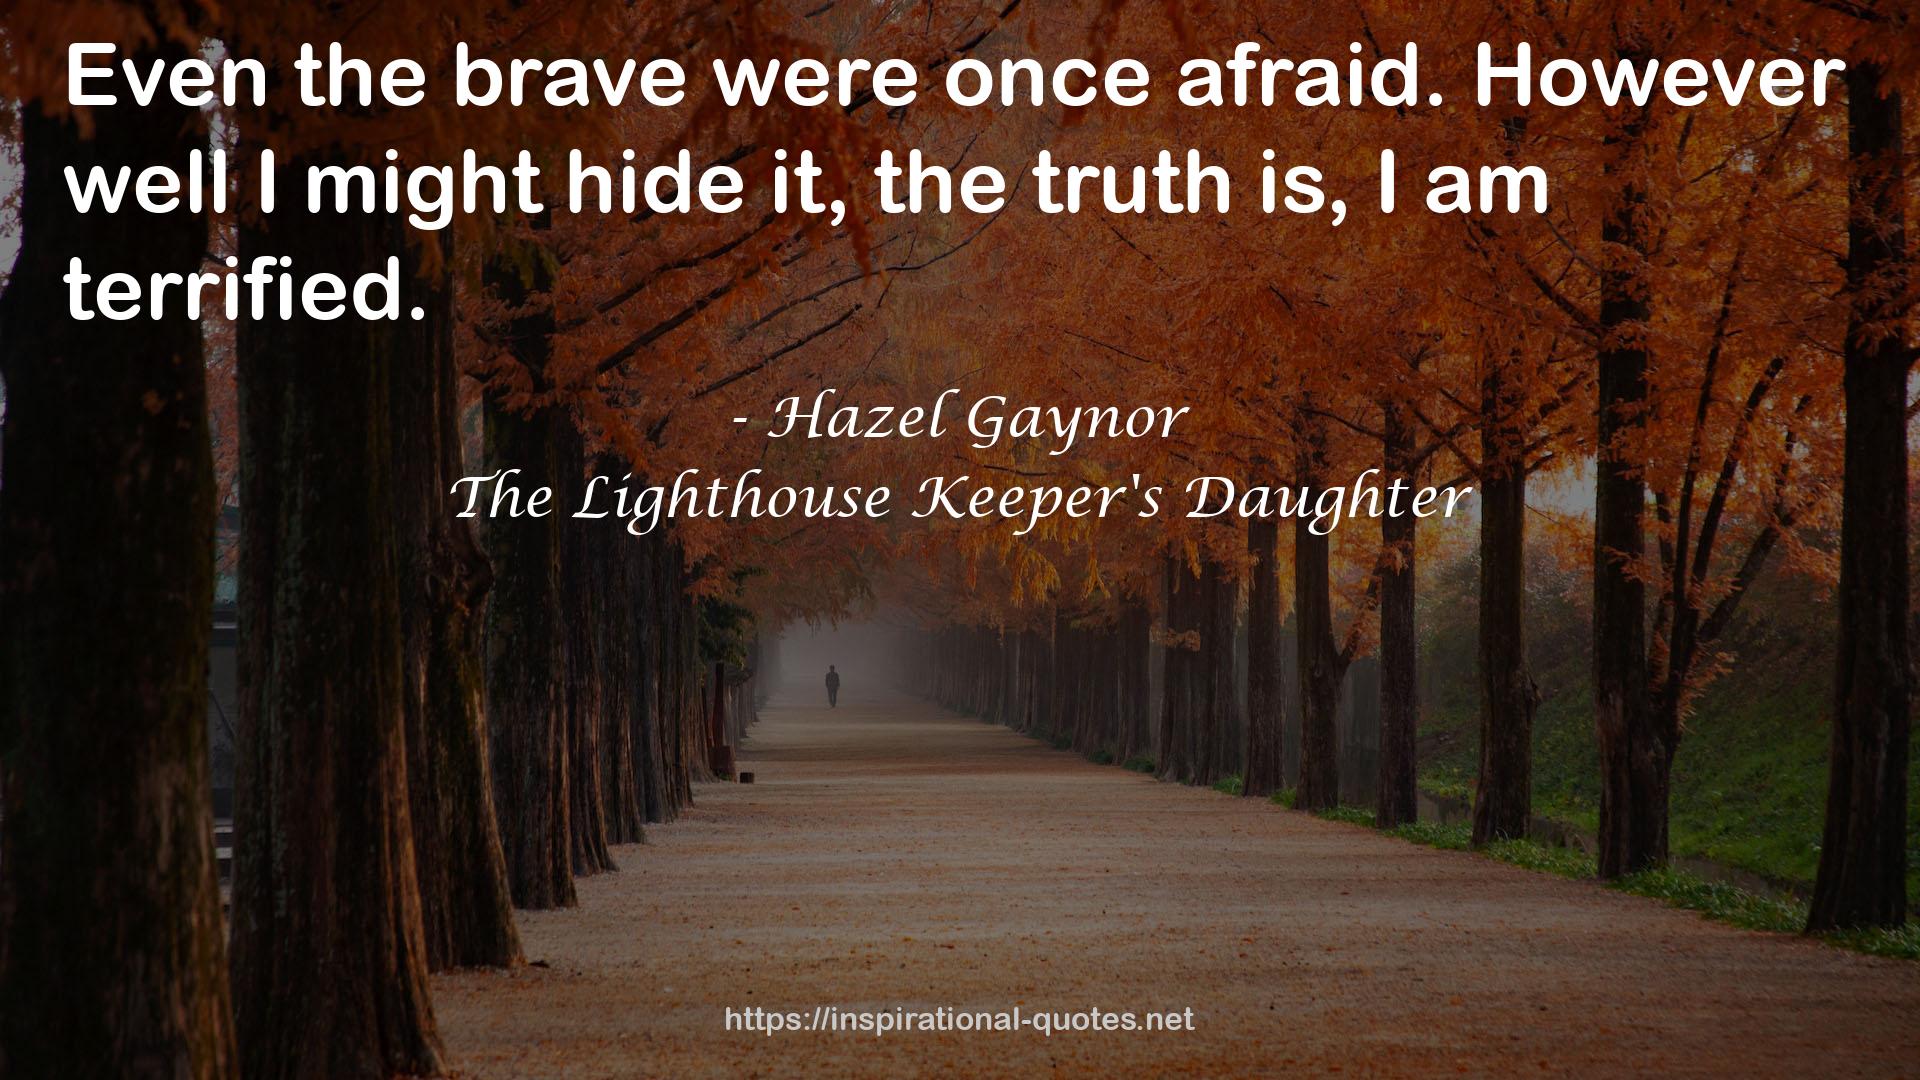 The Lighthouse Keeper's Daughter QUOTES